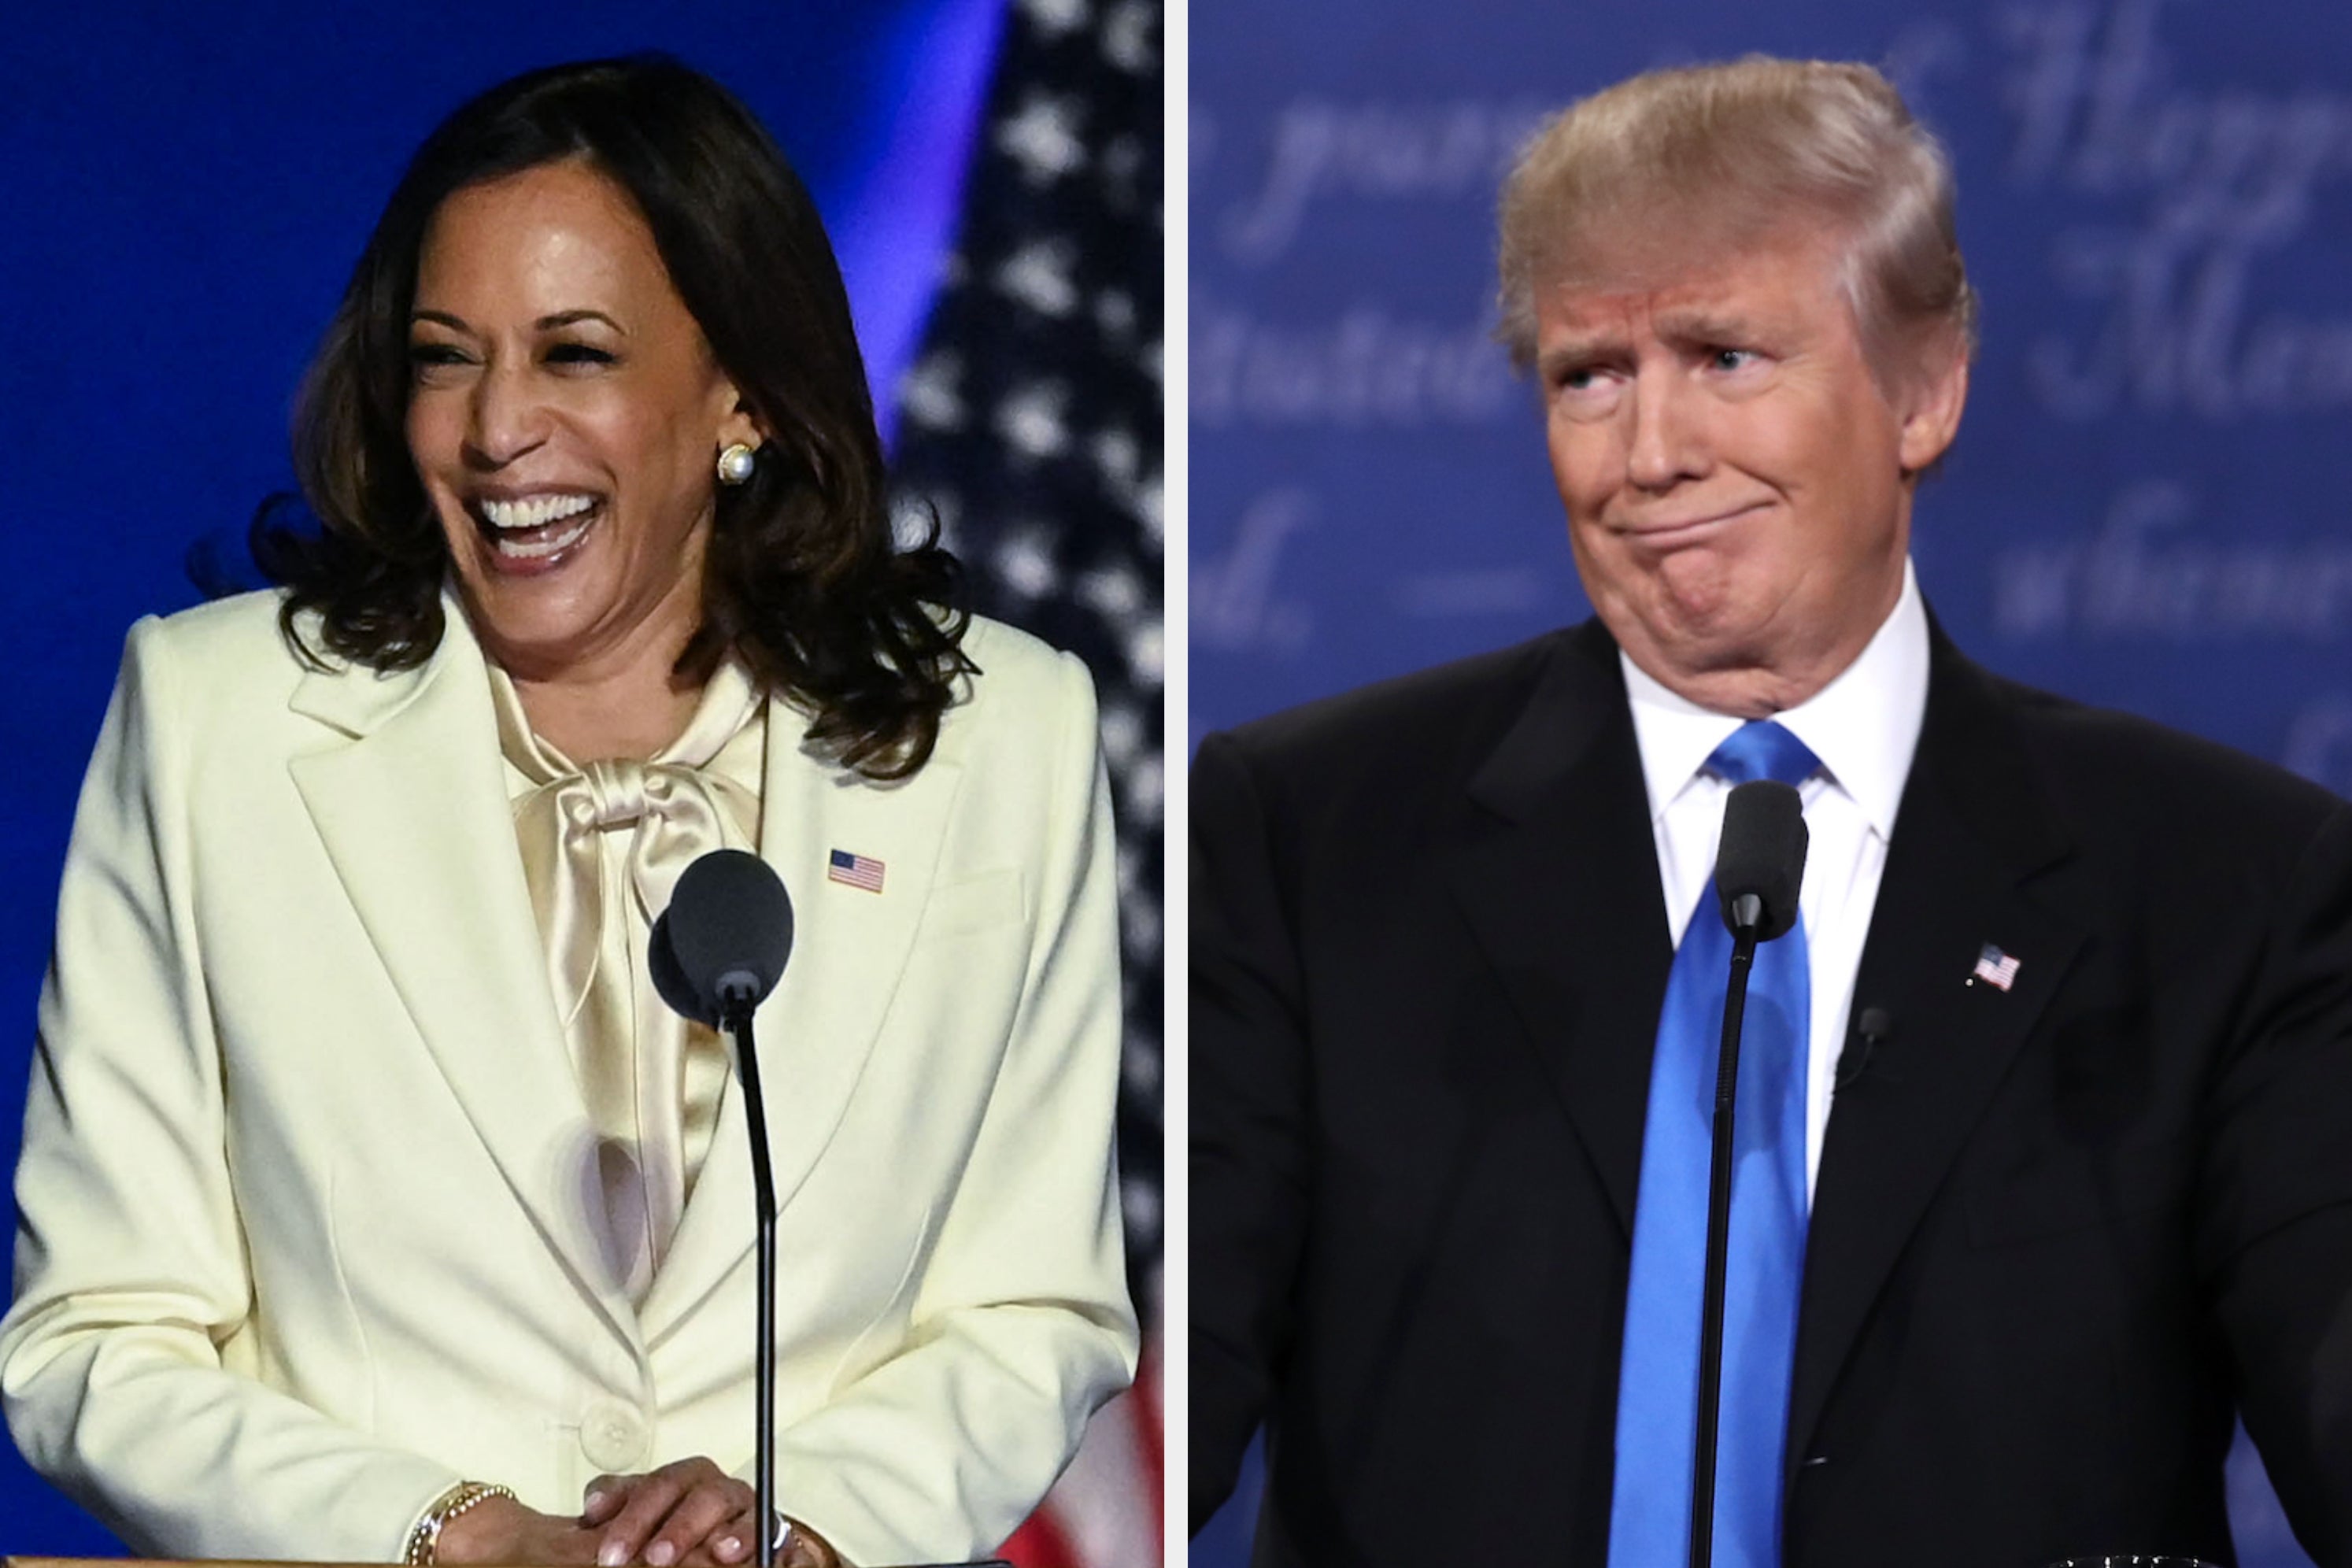 I'm Genuinely Curious If You Believe Kamala Harris Can Beat Donald Trump In The General Election